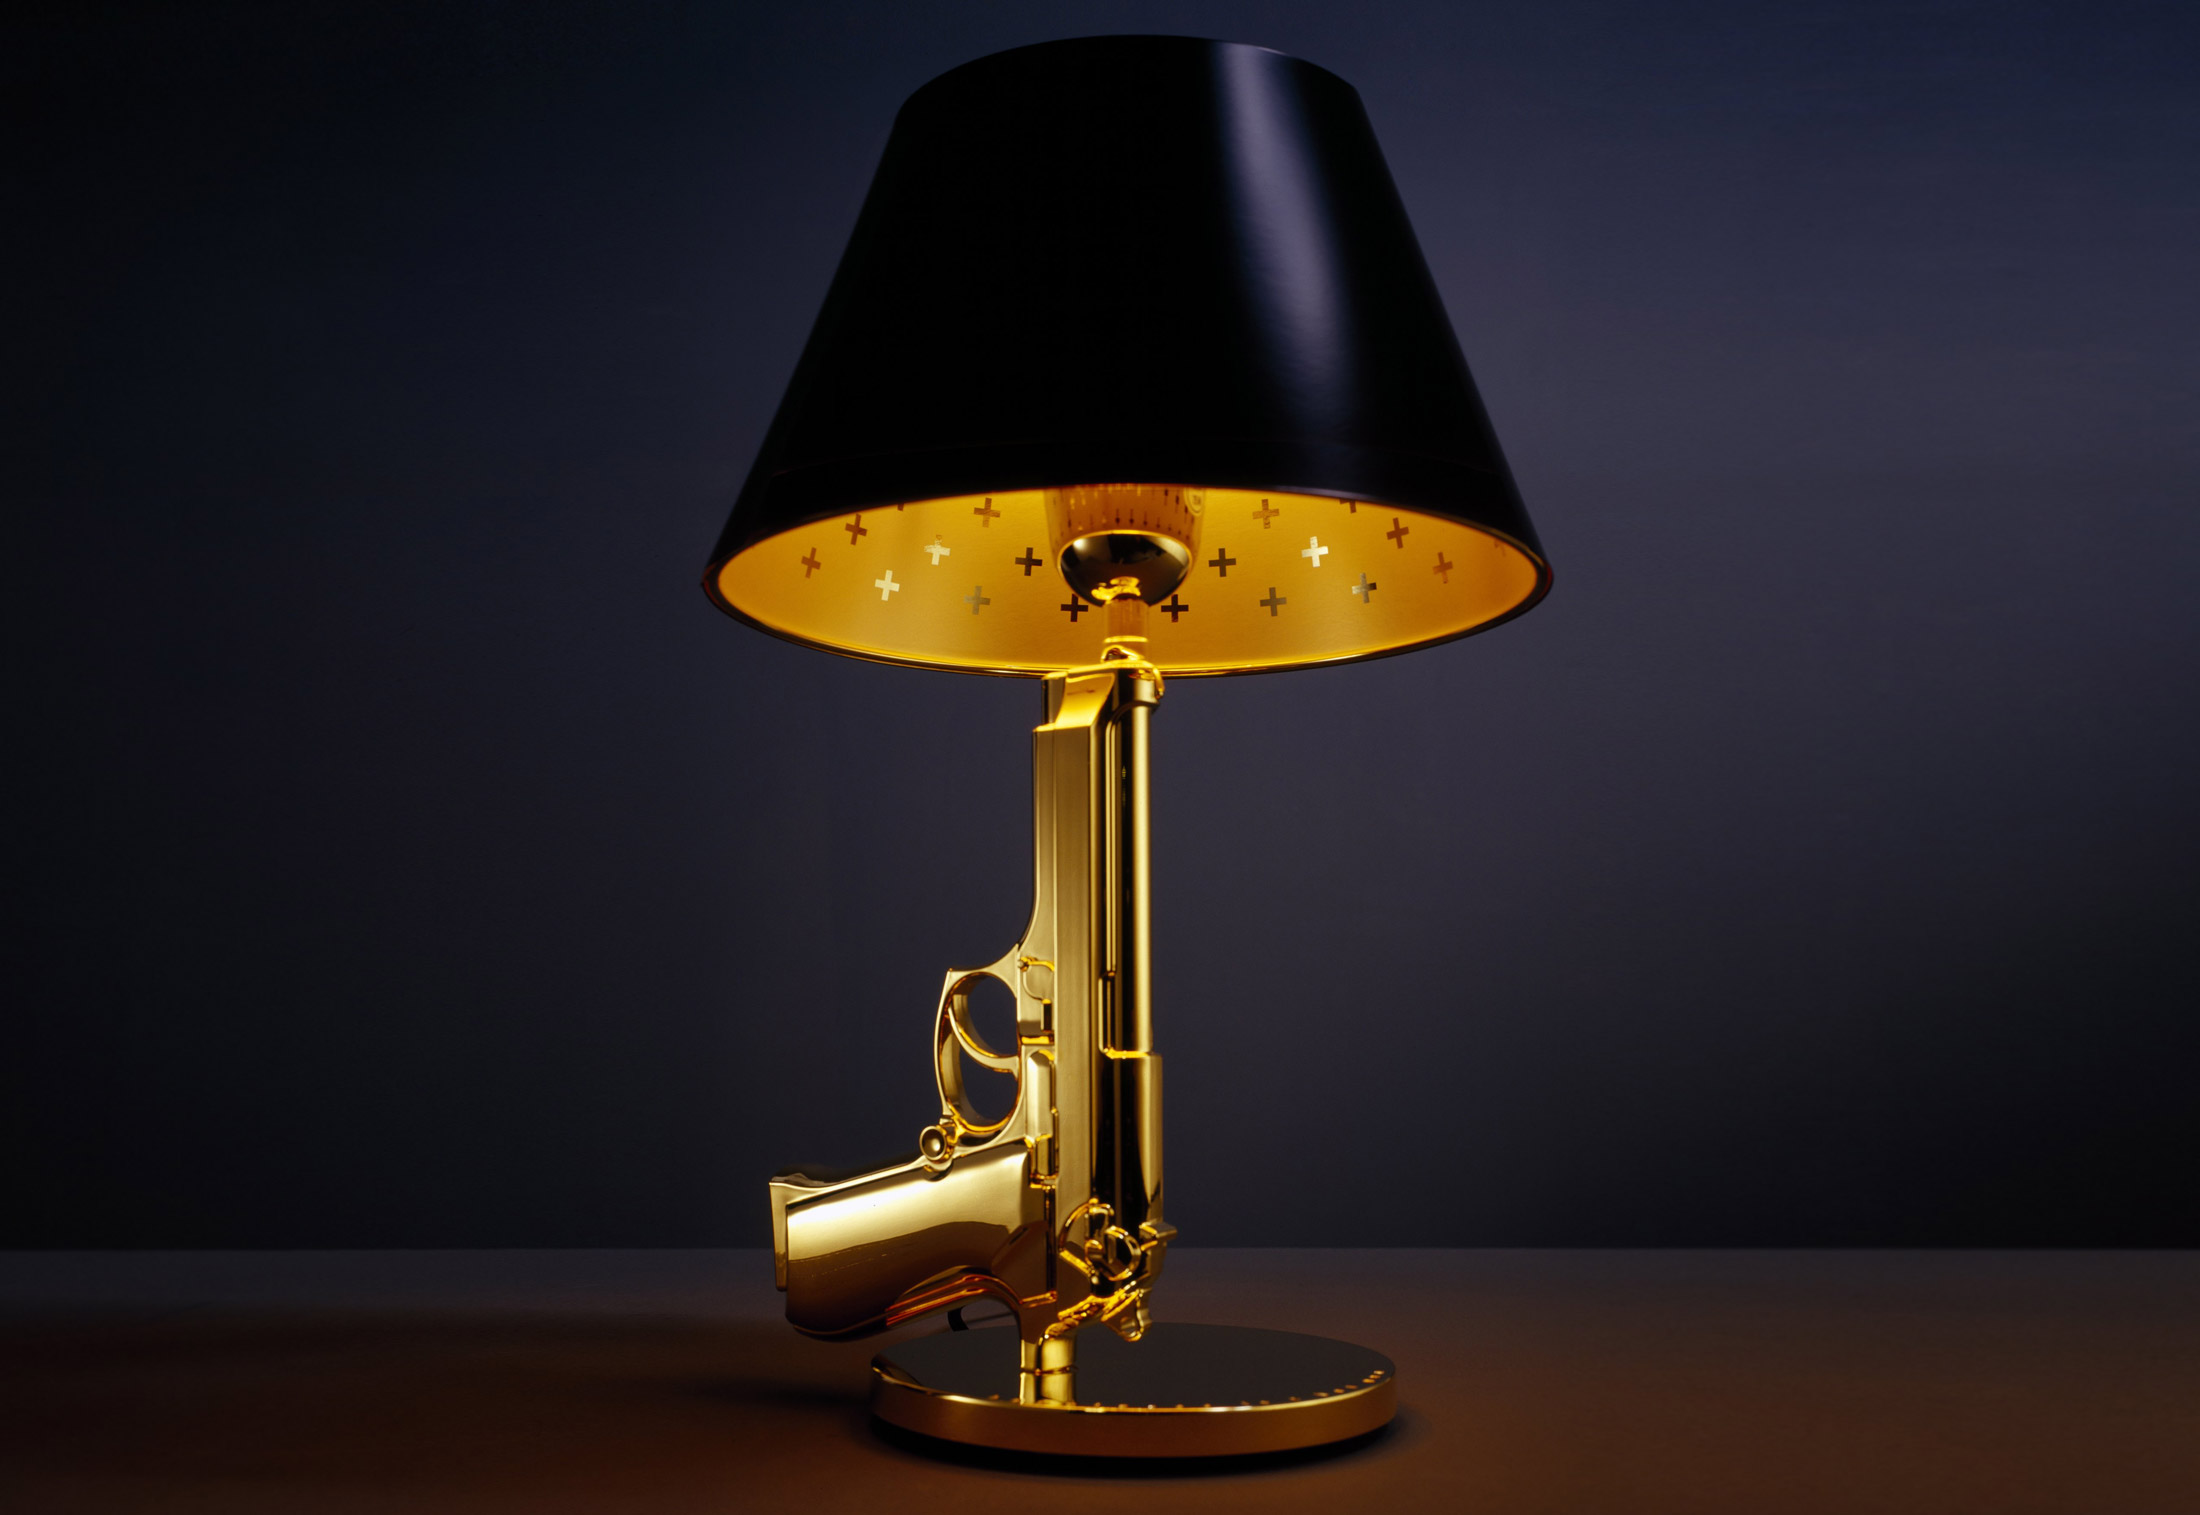 awesome-design-ideas-Bedside-Gun-Table-Lamp-Philippe-Starck-3